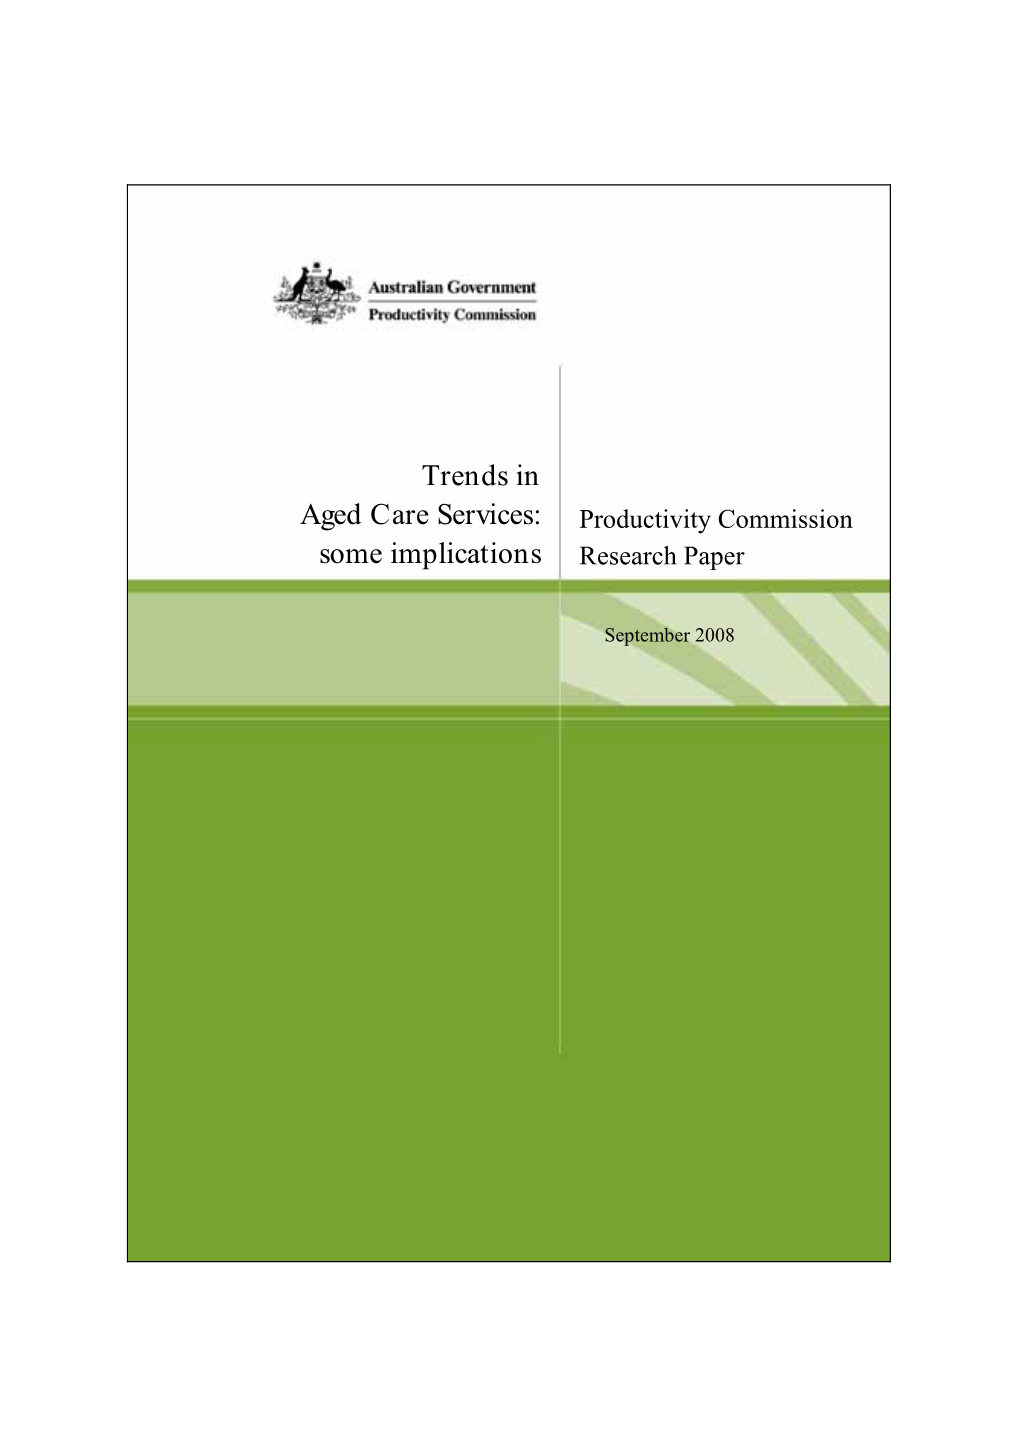 Trends in Aged Care Services: Some Implications, Commission Research Paper, Canberra